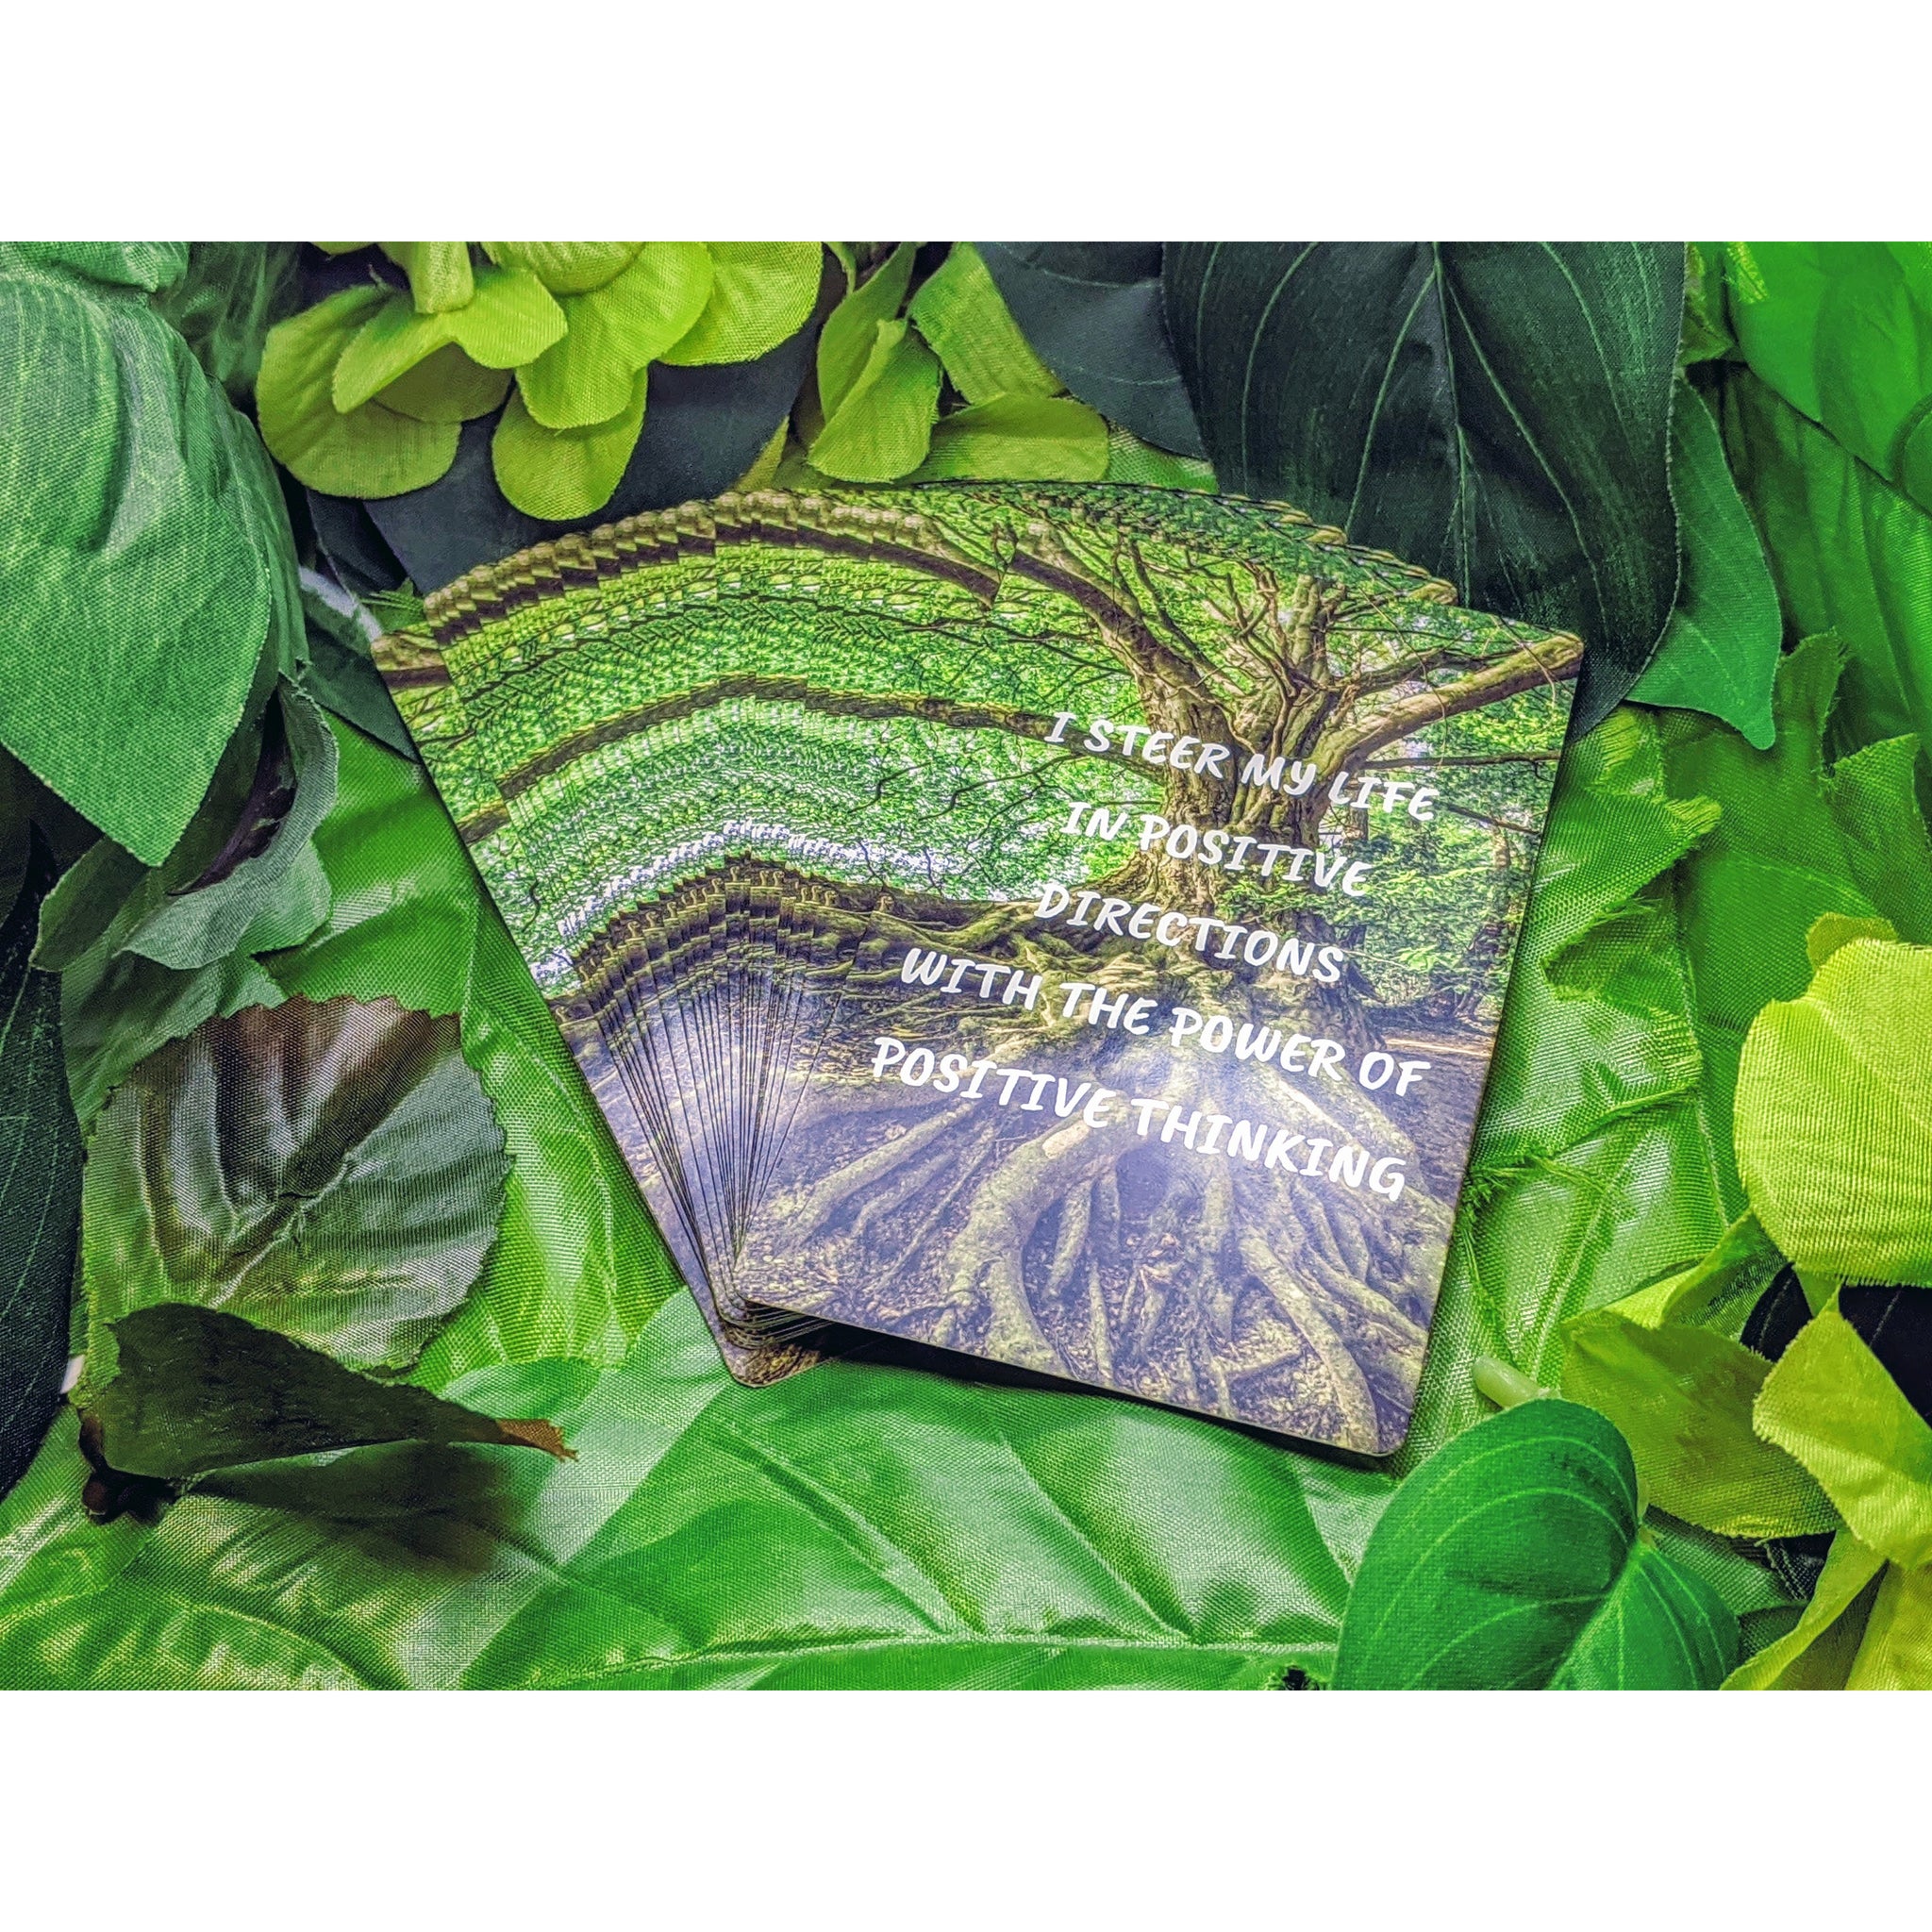 Affirmation Cards by Create to be Great. Positive Affirmations, Motivational/inspirational quotes, reprogramming your mind, Tarot Cards, Law of Attraction. Manifestation Tools